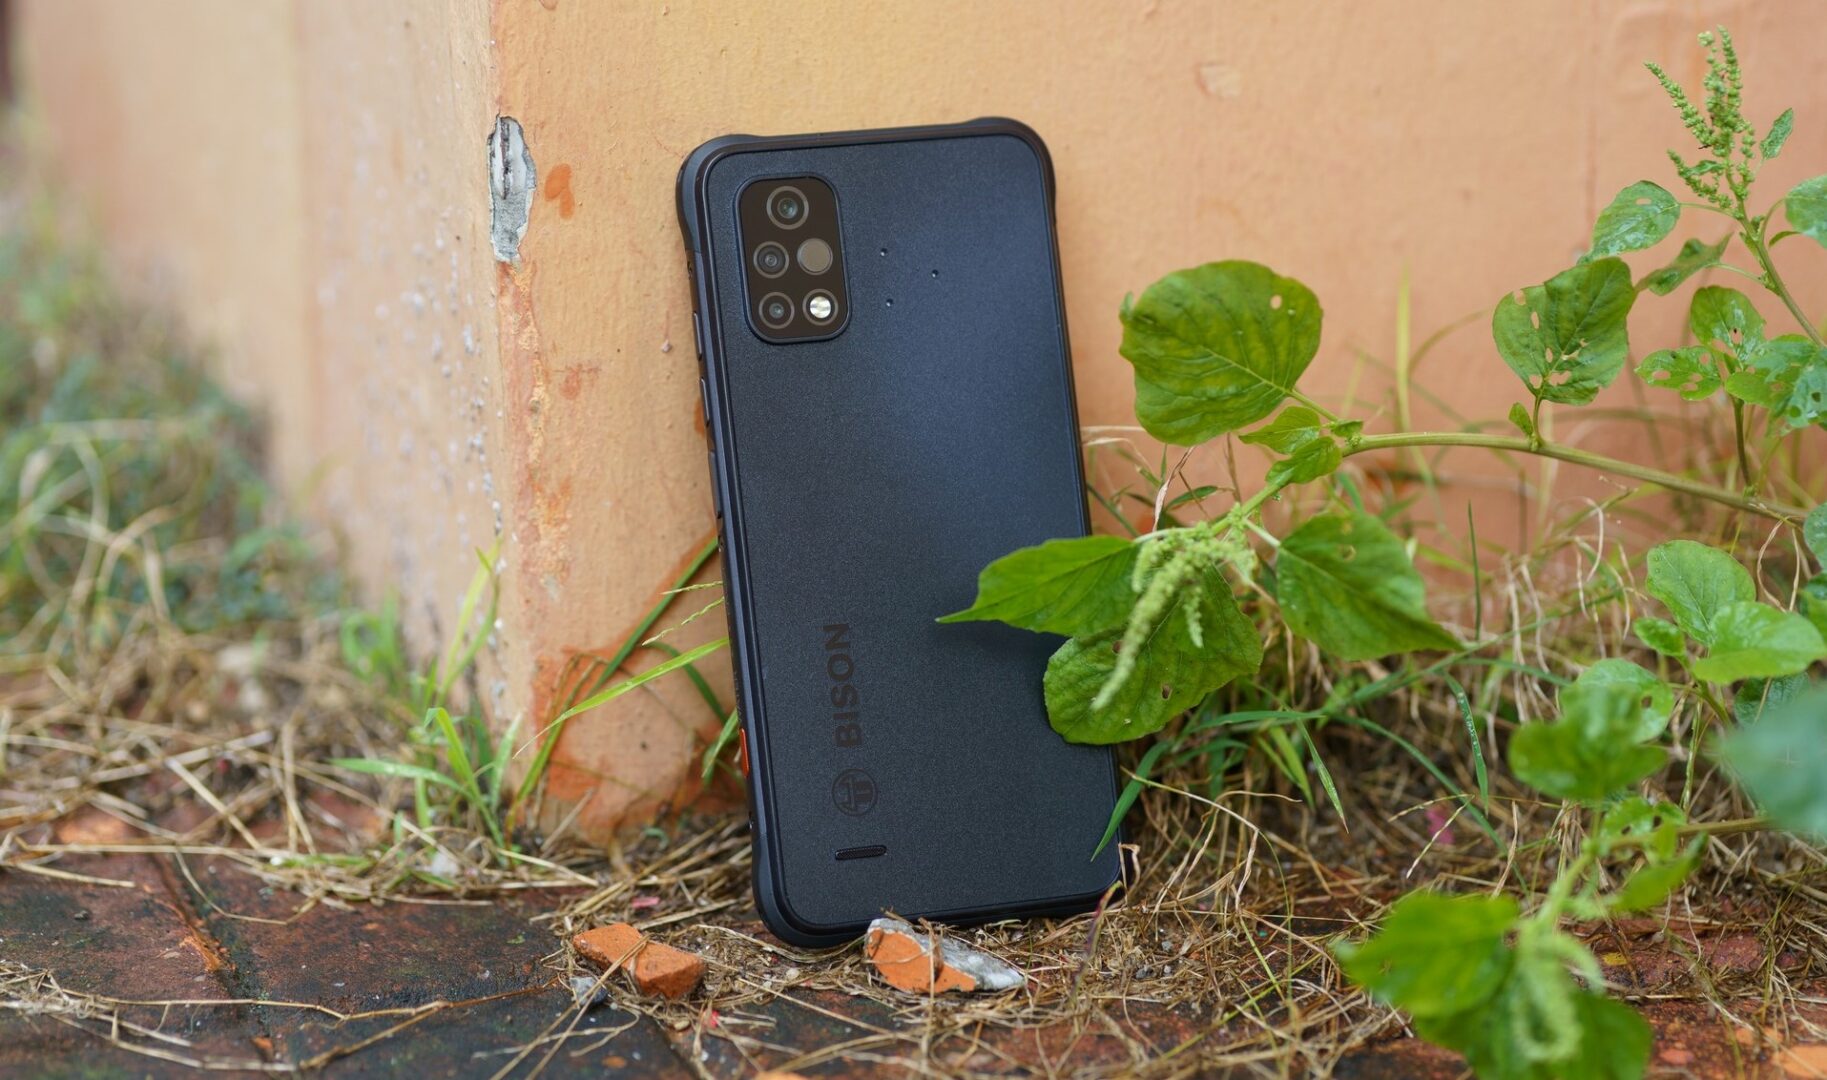 Umidigi Bison 2 And Bison 2 Pro Review - New Flagship Rugged Smartphones Series